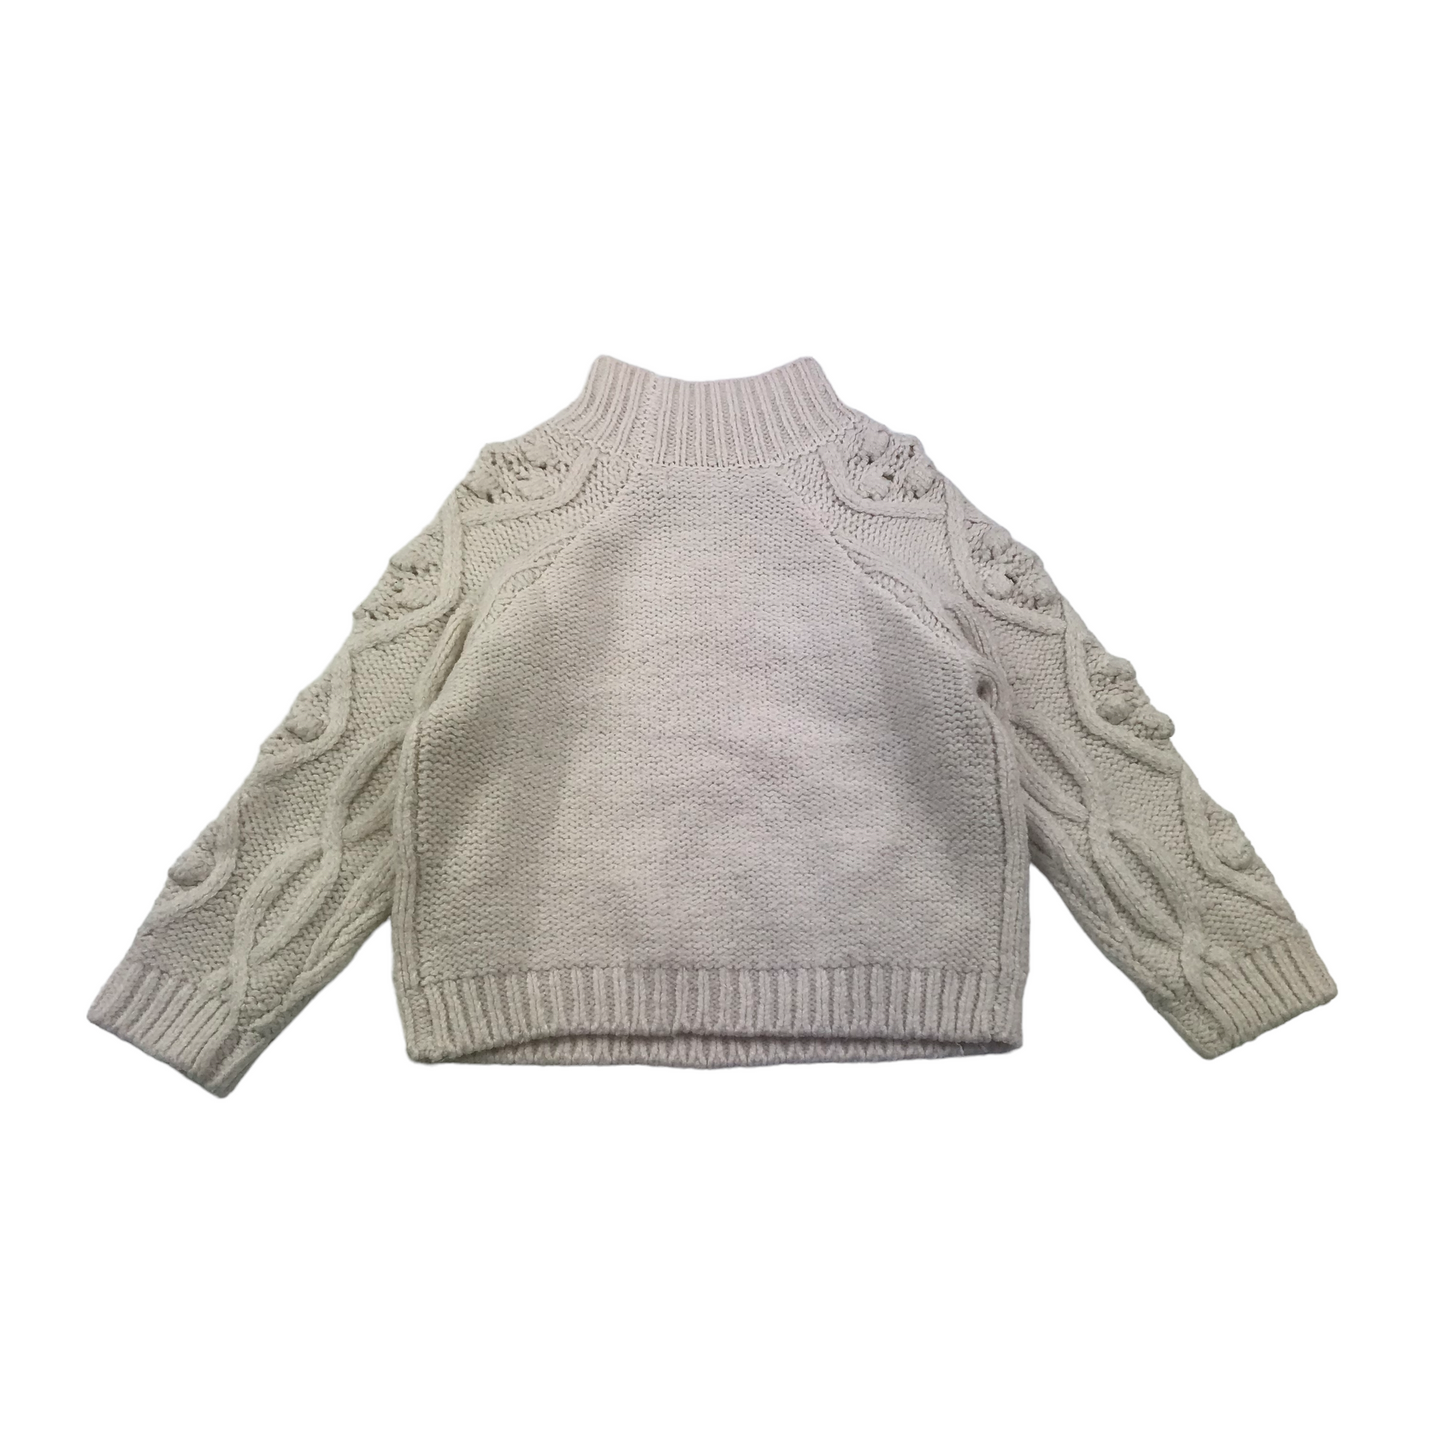 Primark White High Collar Knitted Jumper Age 4